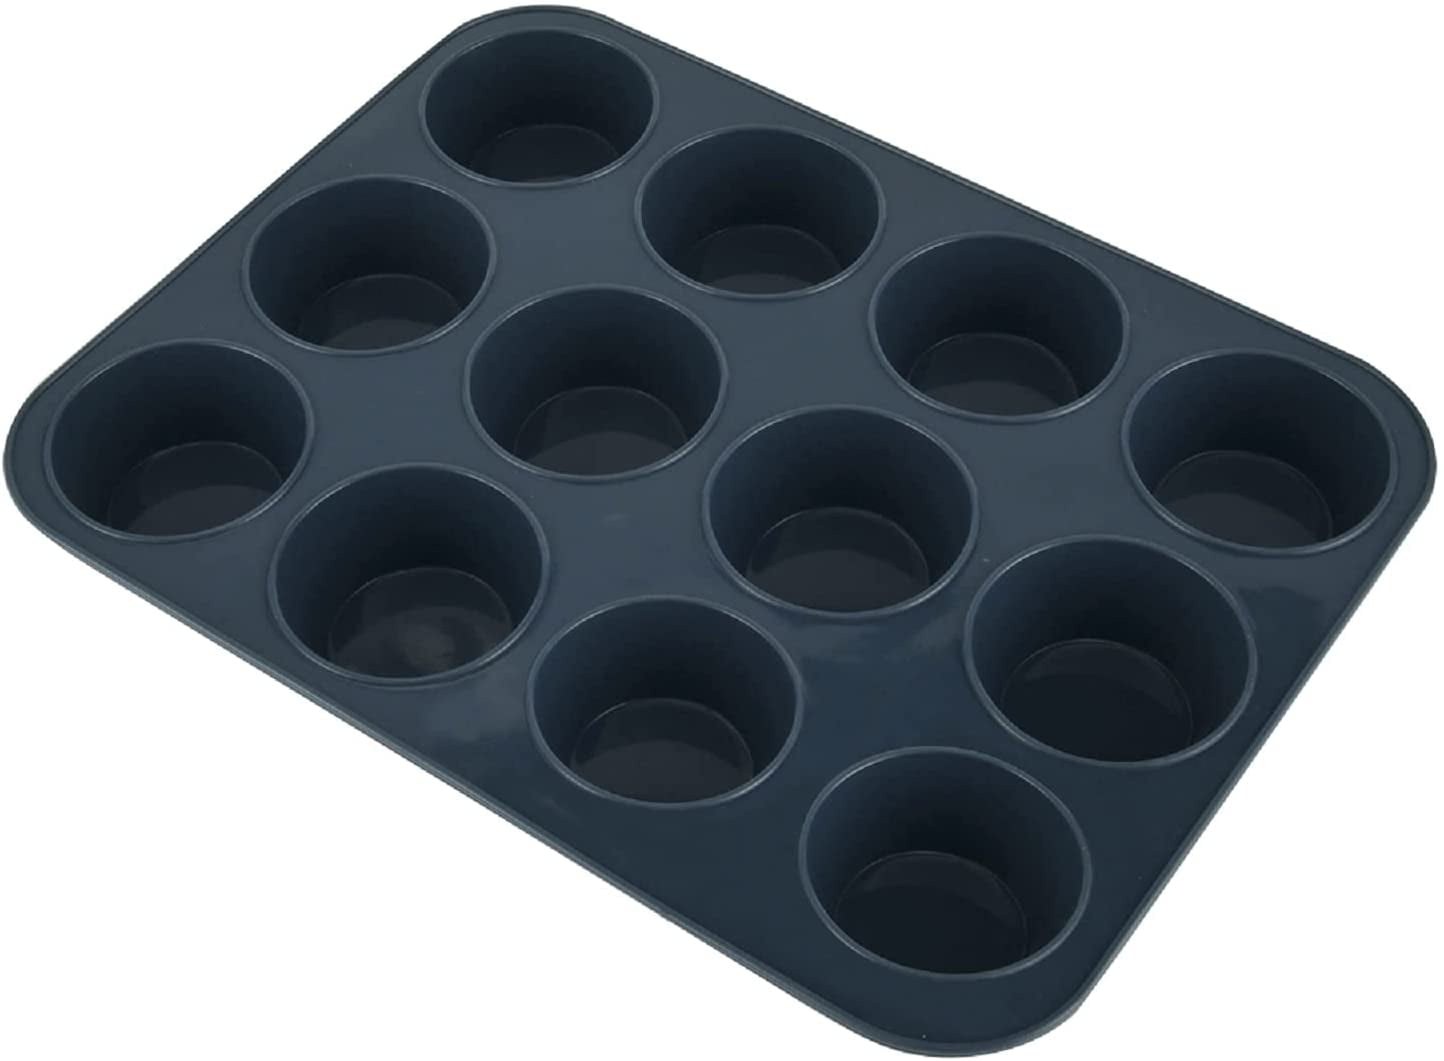 12 SILICONE MUFFIN YORKSHIRE PUDDING JELLY MOLD CUPCAKE BAKING TRAY BAKEWARE 